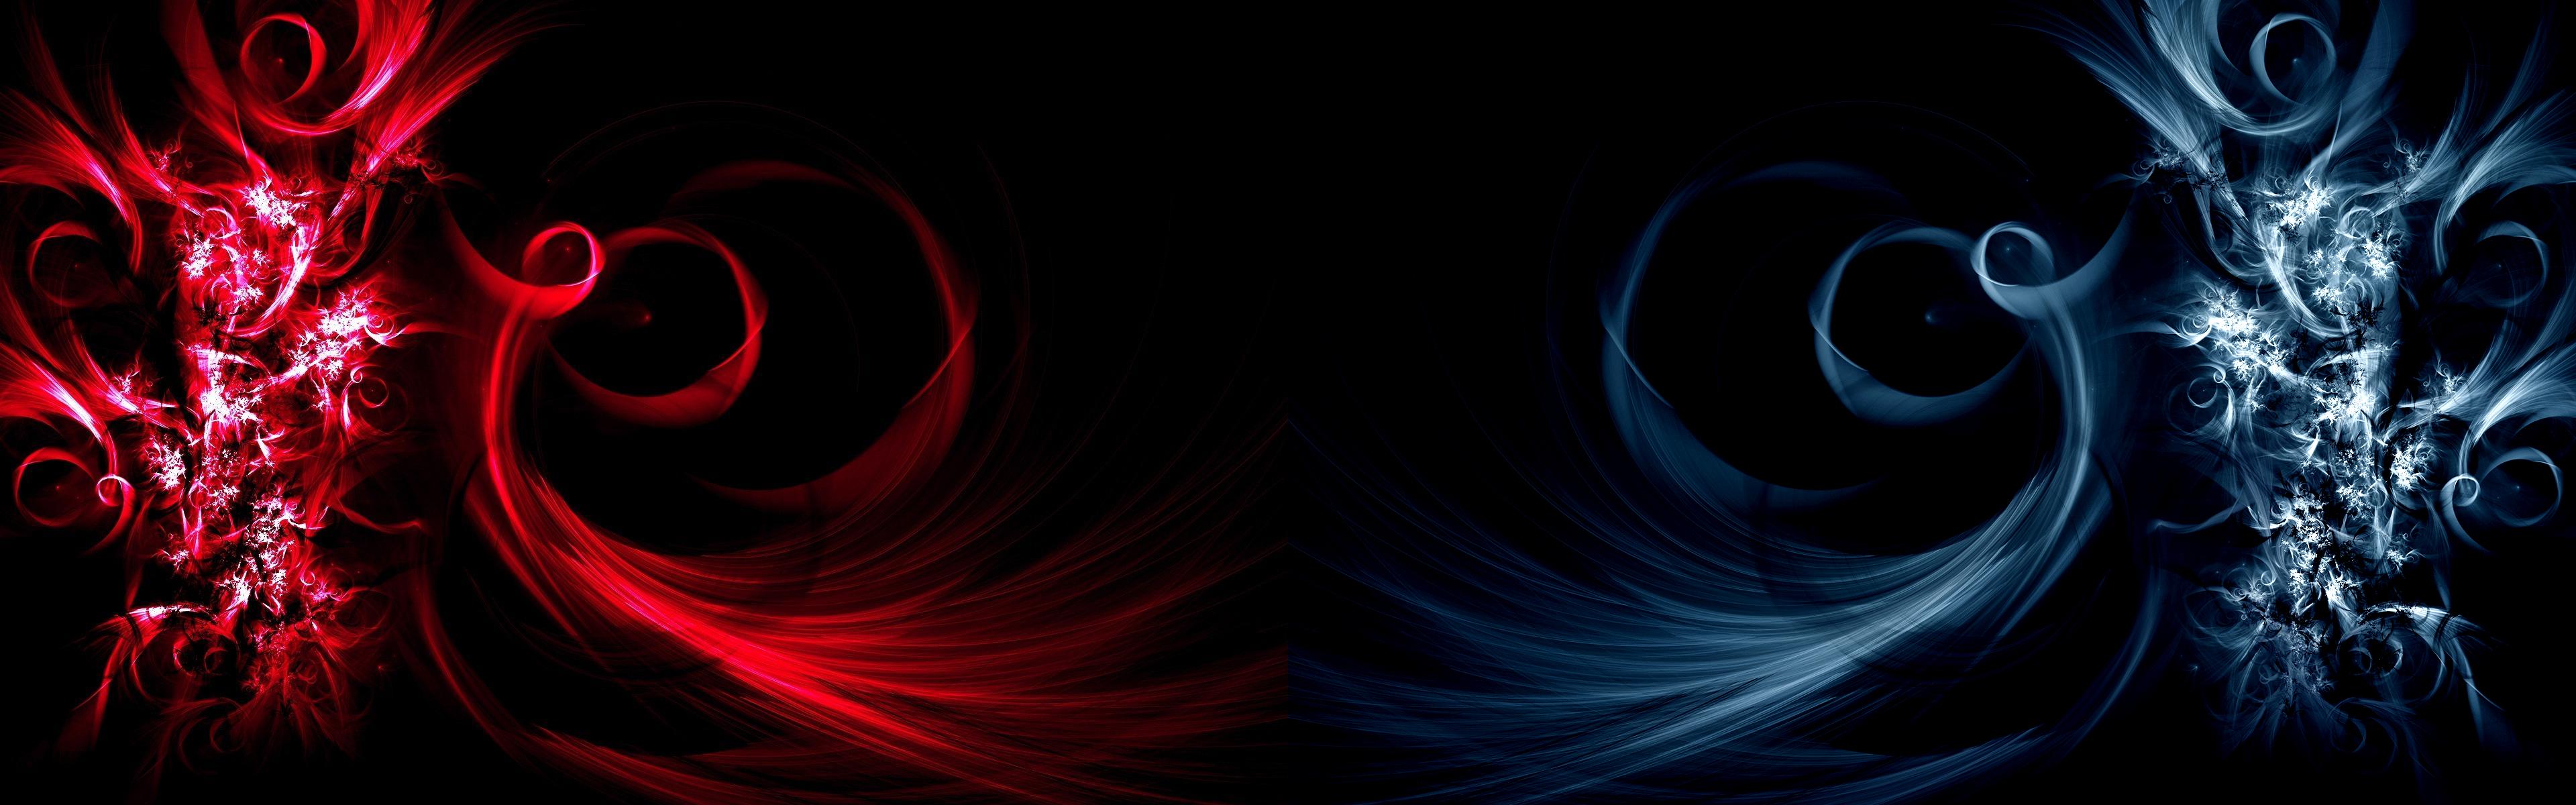 Two Monitors Wallpapers - Wallpaper Cave